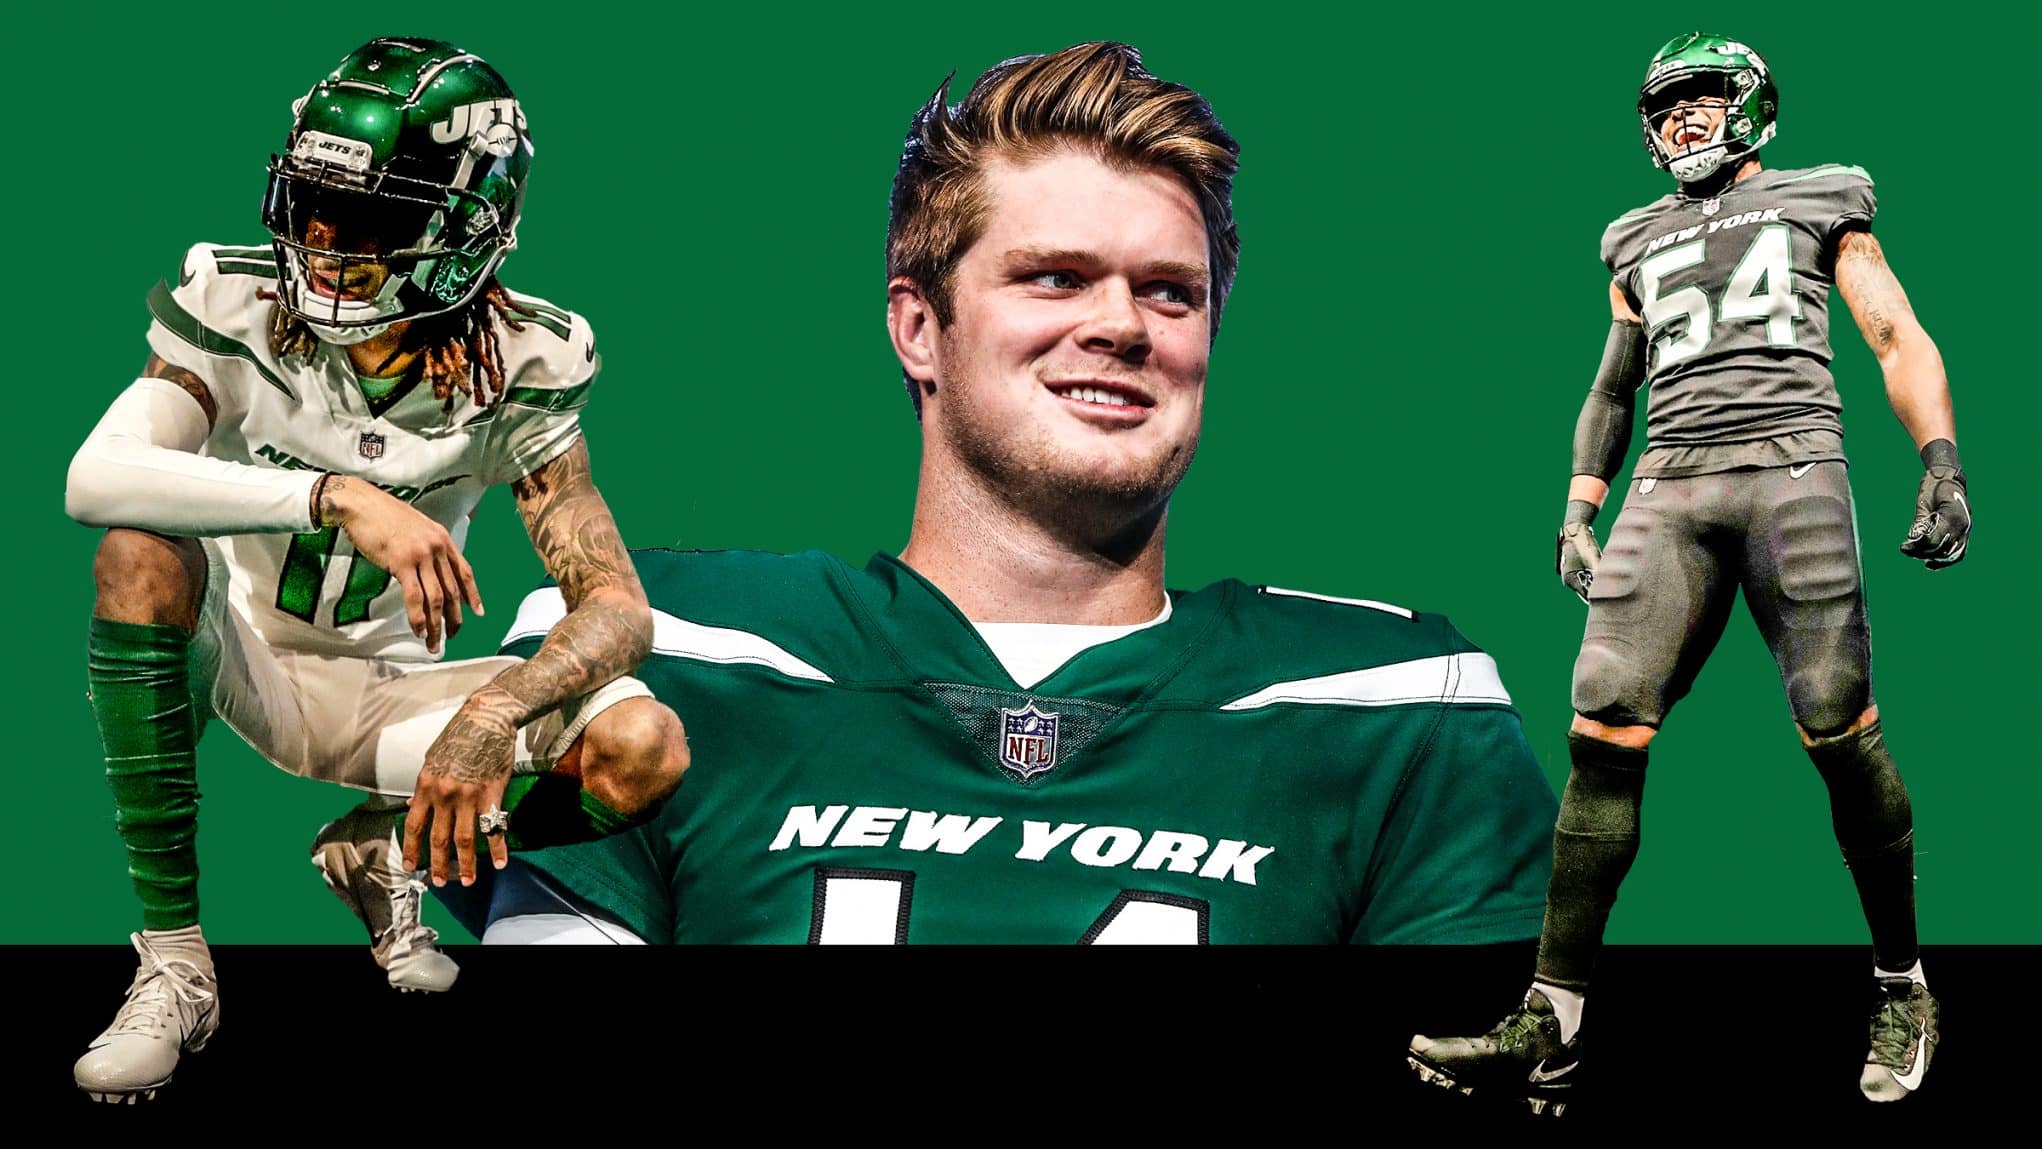 New York Jets: Uniform pomp & circumstance means nothing without wins